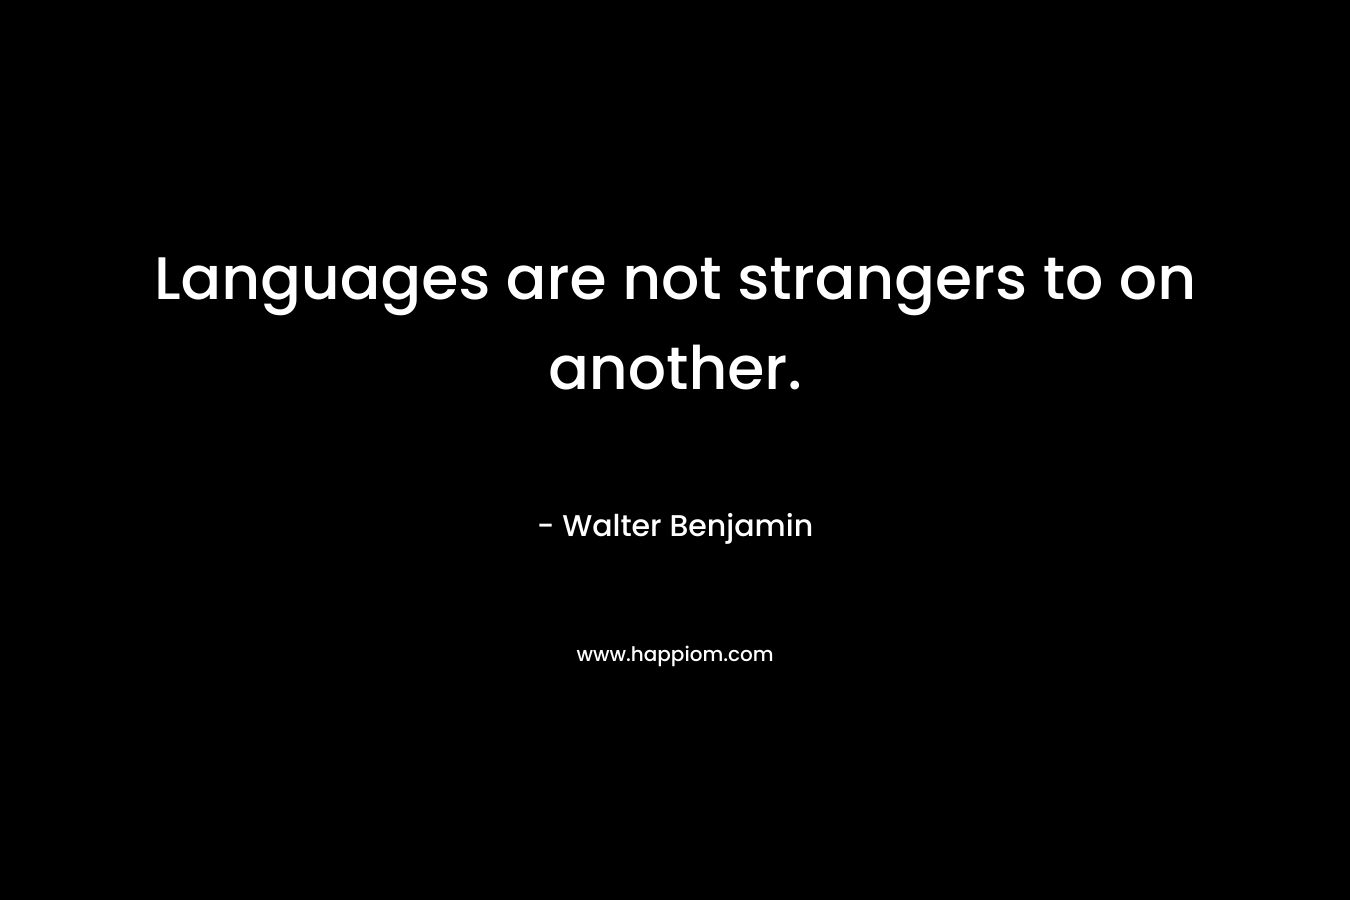 Languages are not strangers to on another. – Walter Benjamin